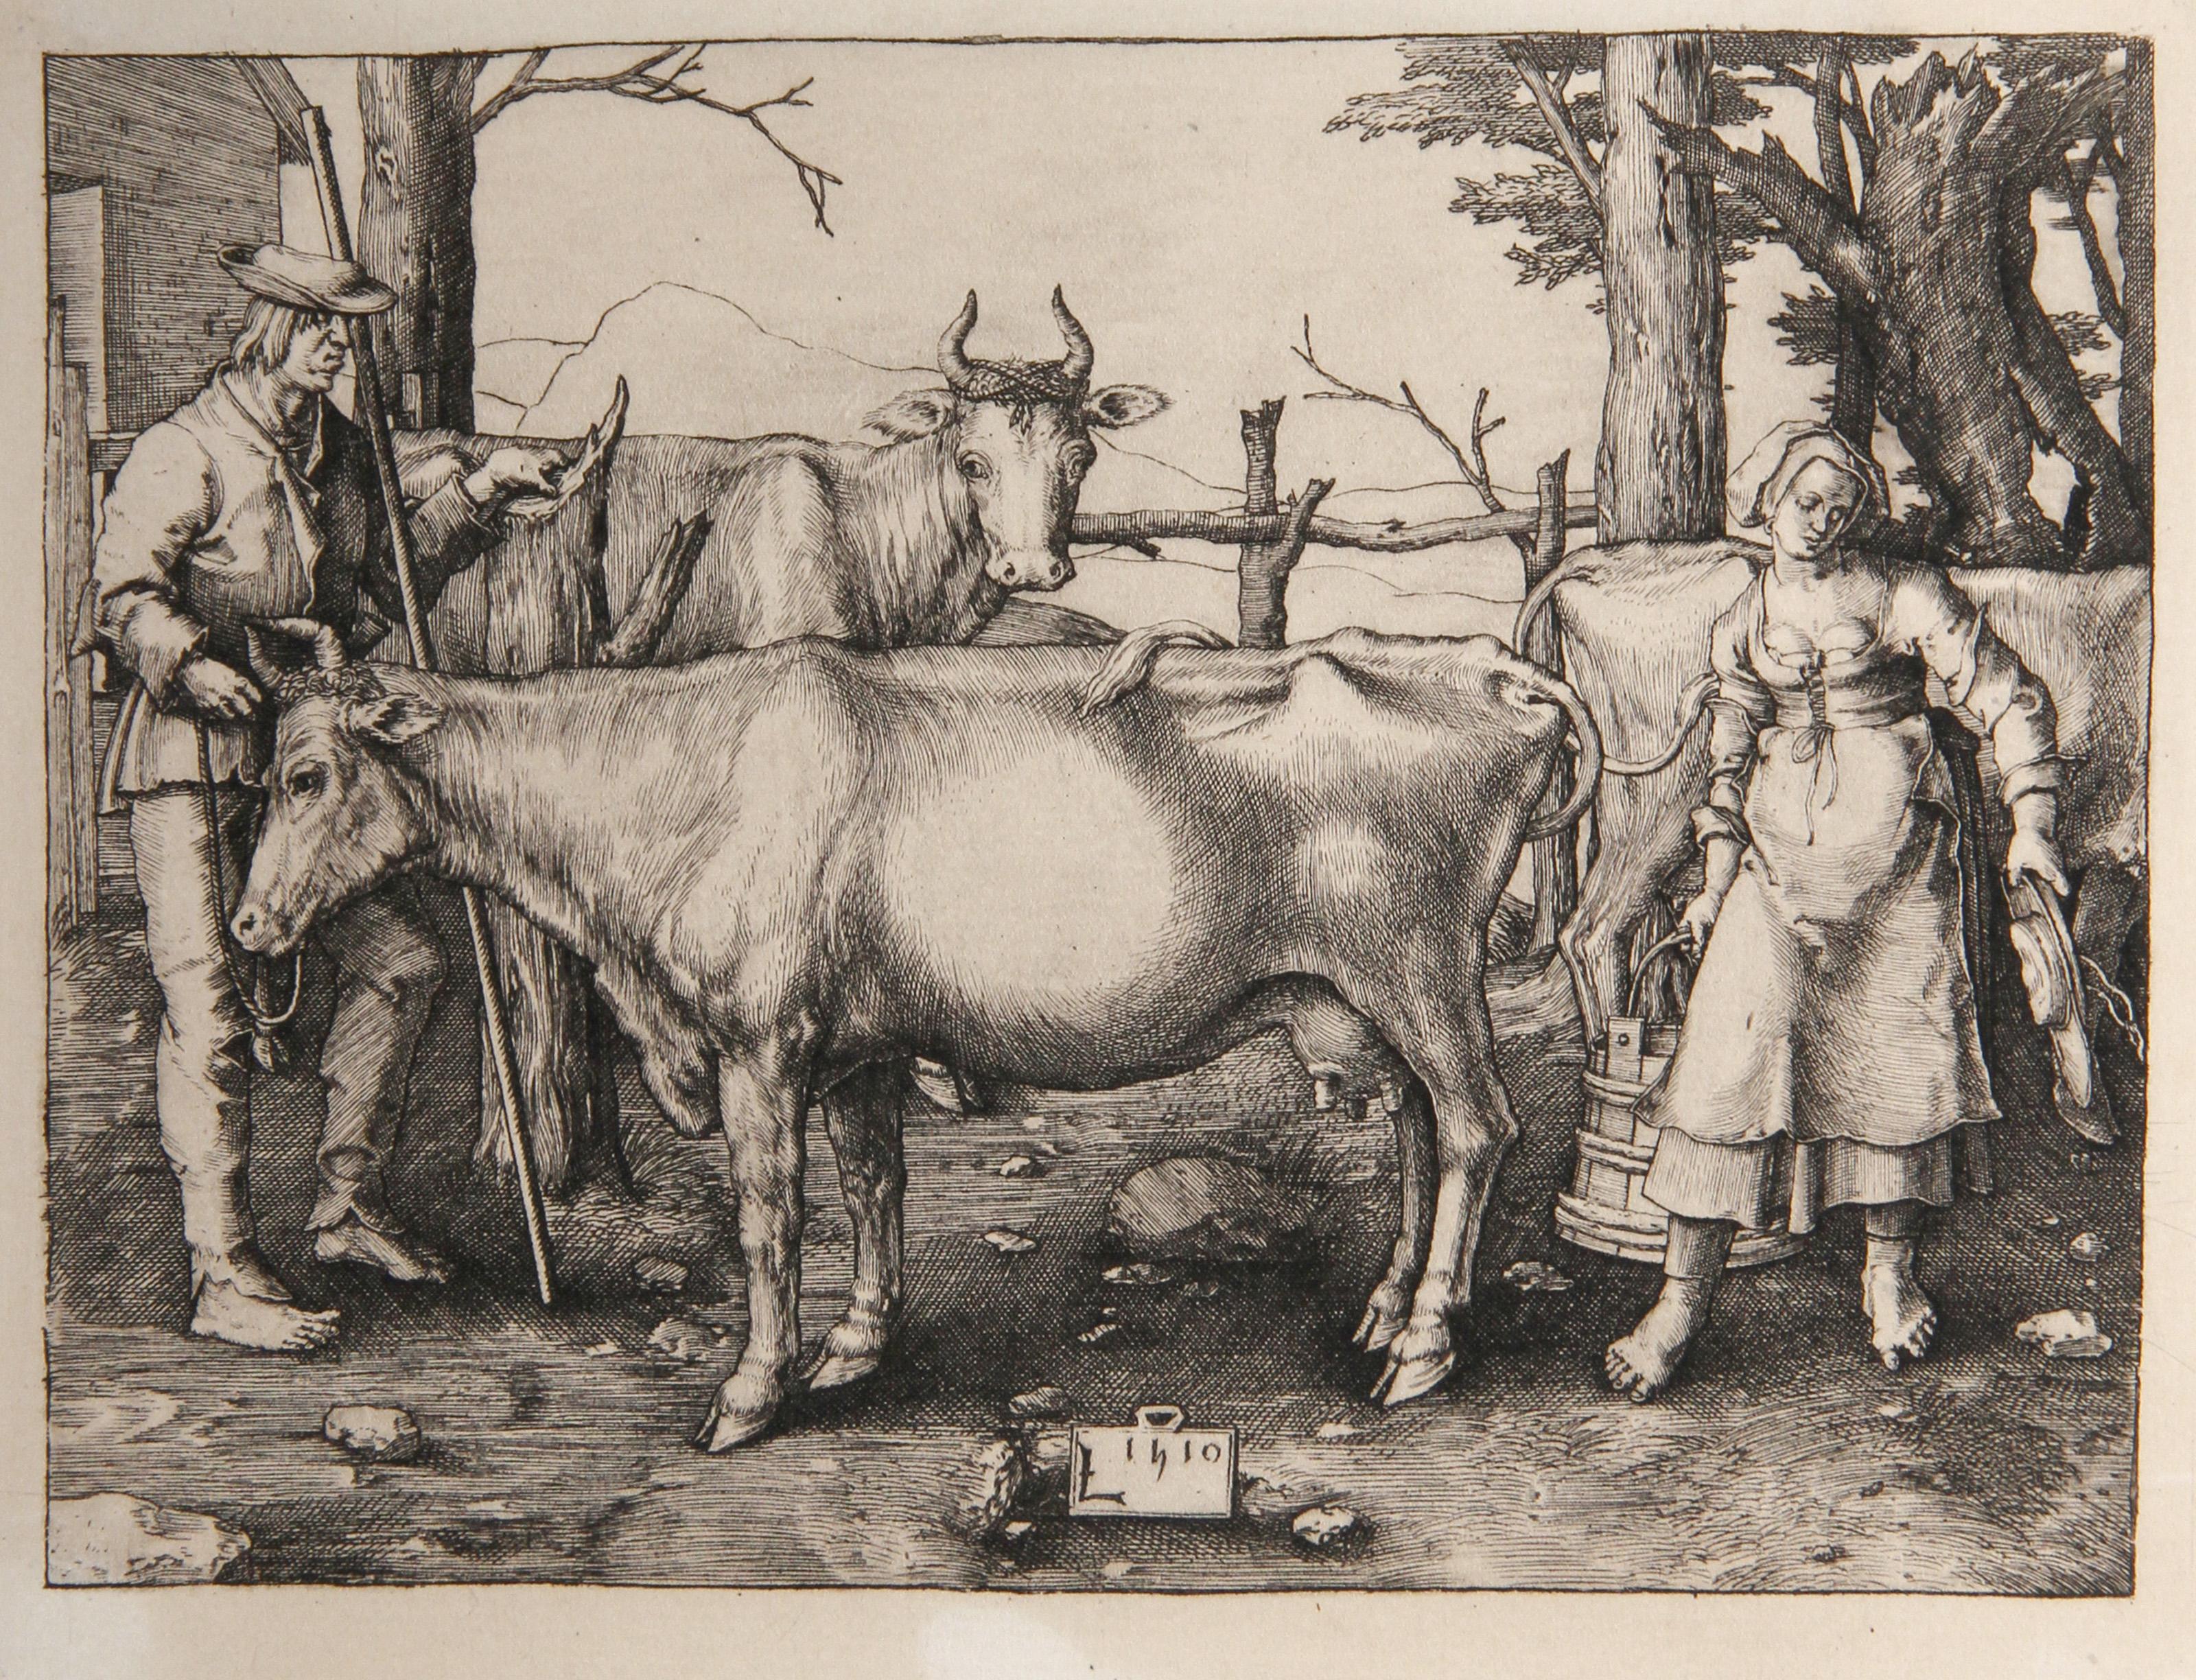 Artist: Lucas van Leyden, After by Amand Durand, Dutch (1494 - 1533) - La Laitiere, Year: 1873, Medium: Heliogravure, Size: 5  x 6.5 in. (12.7  x 16.51 cm), Printer: Amand Durand, Description: French Engraver and painter Charles Amand Durand,